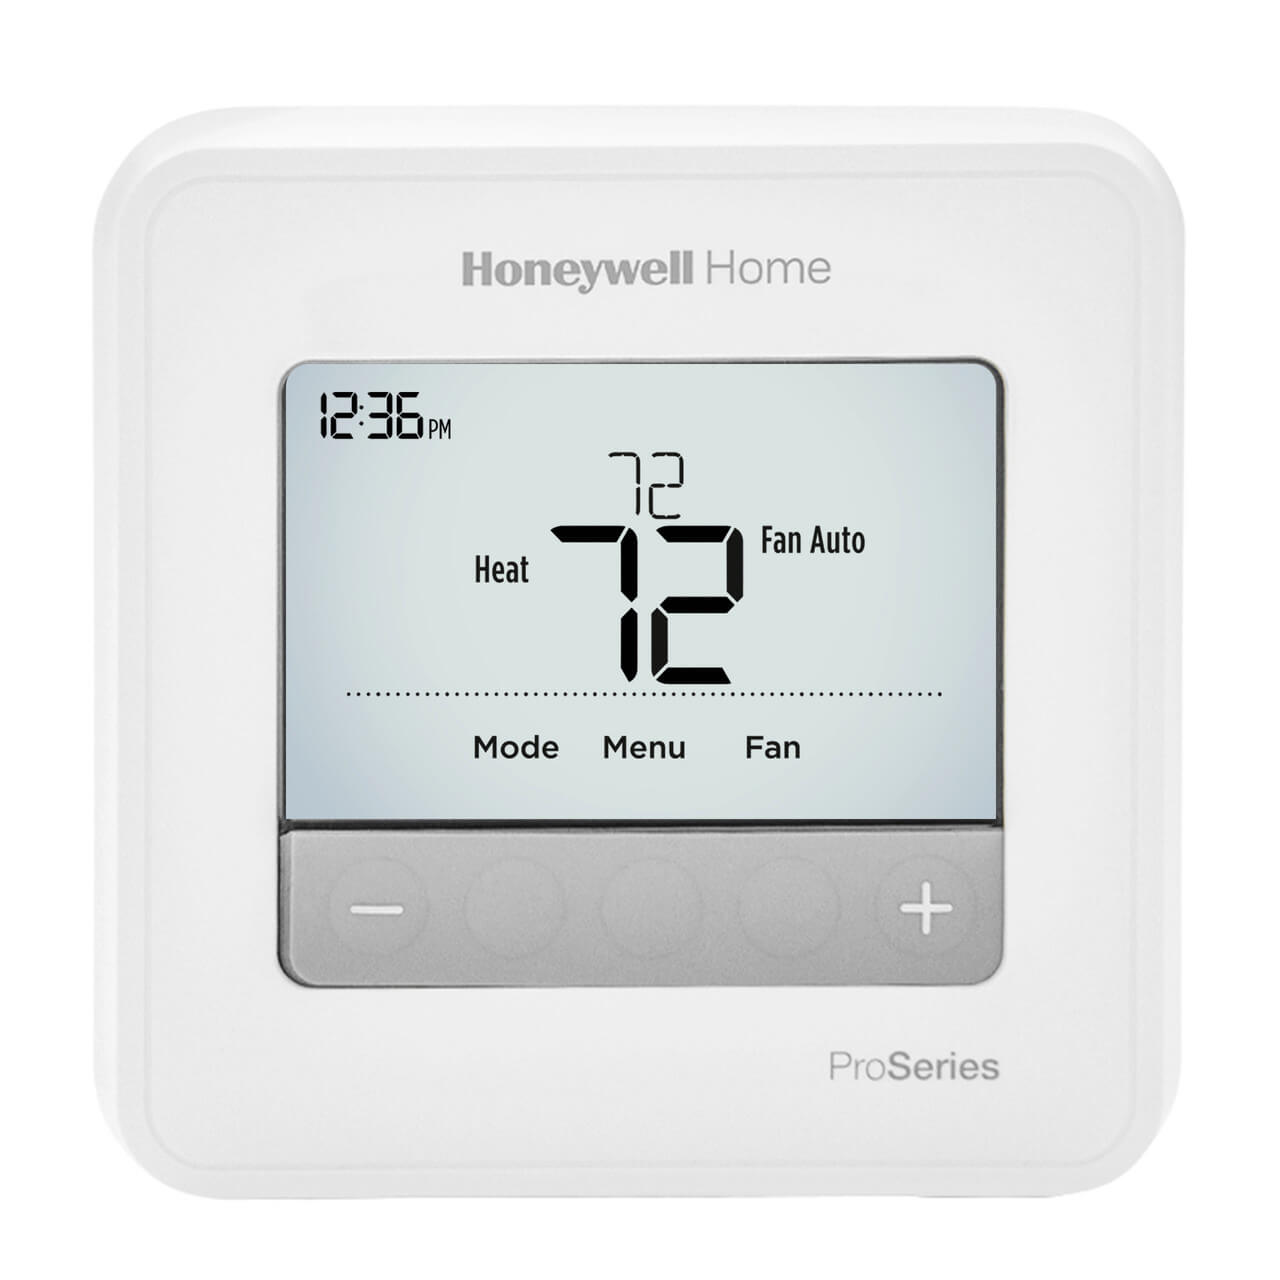 5-Pack Honeywell T4 Pro Series Programmable Thermostat TH4110U2005 + LCD Cleaner Bundle